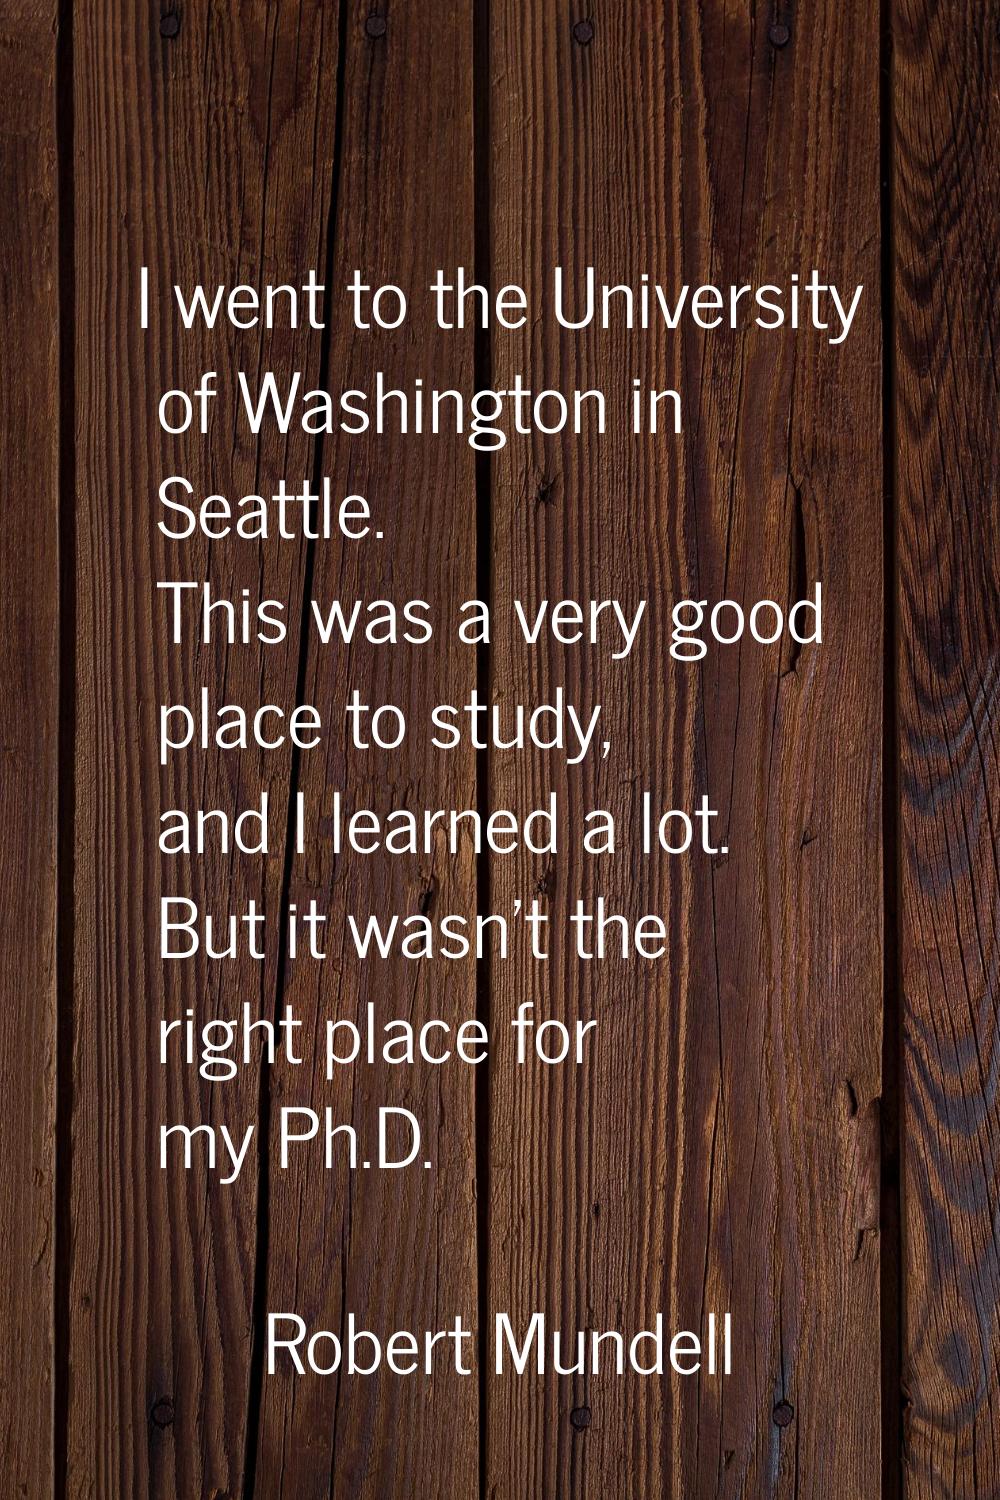 I went to the University of Washington in Seattle. This was a very good place to study, and I learn